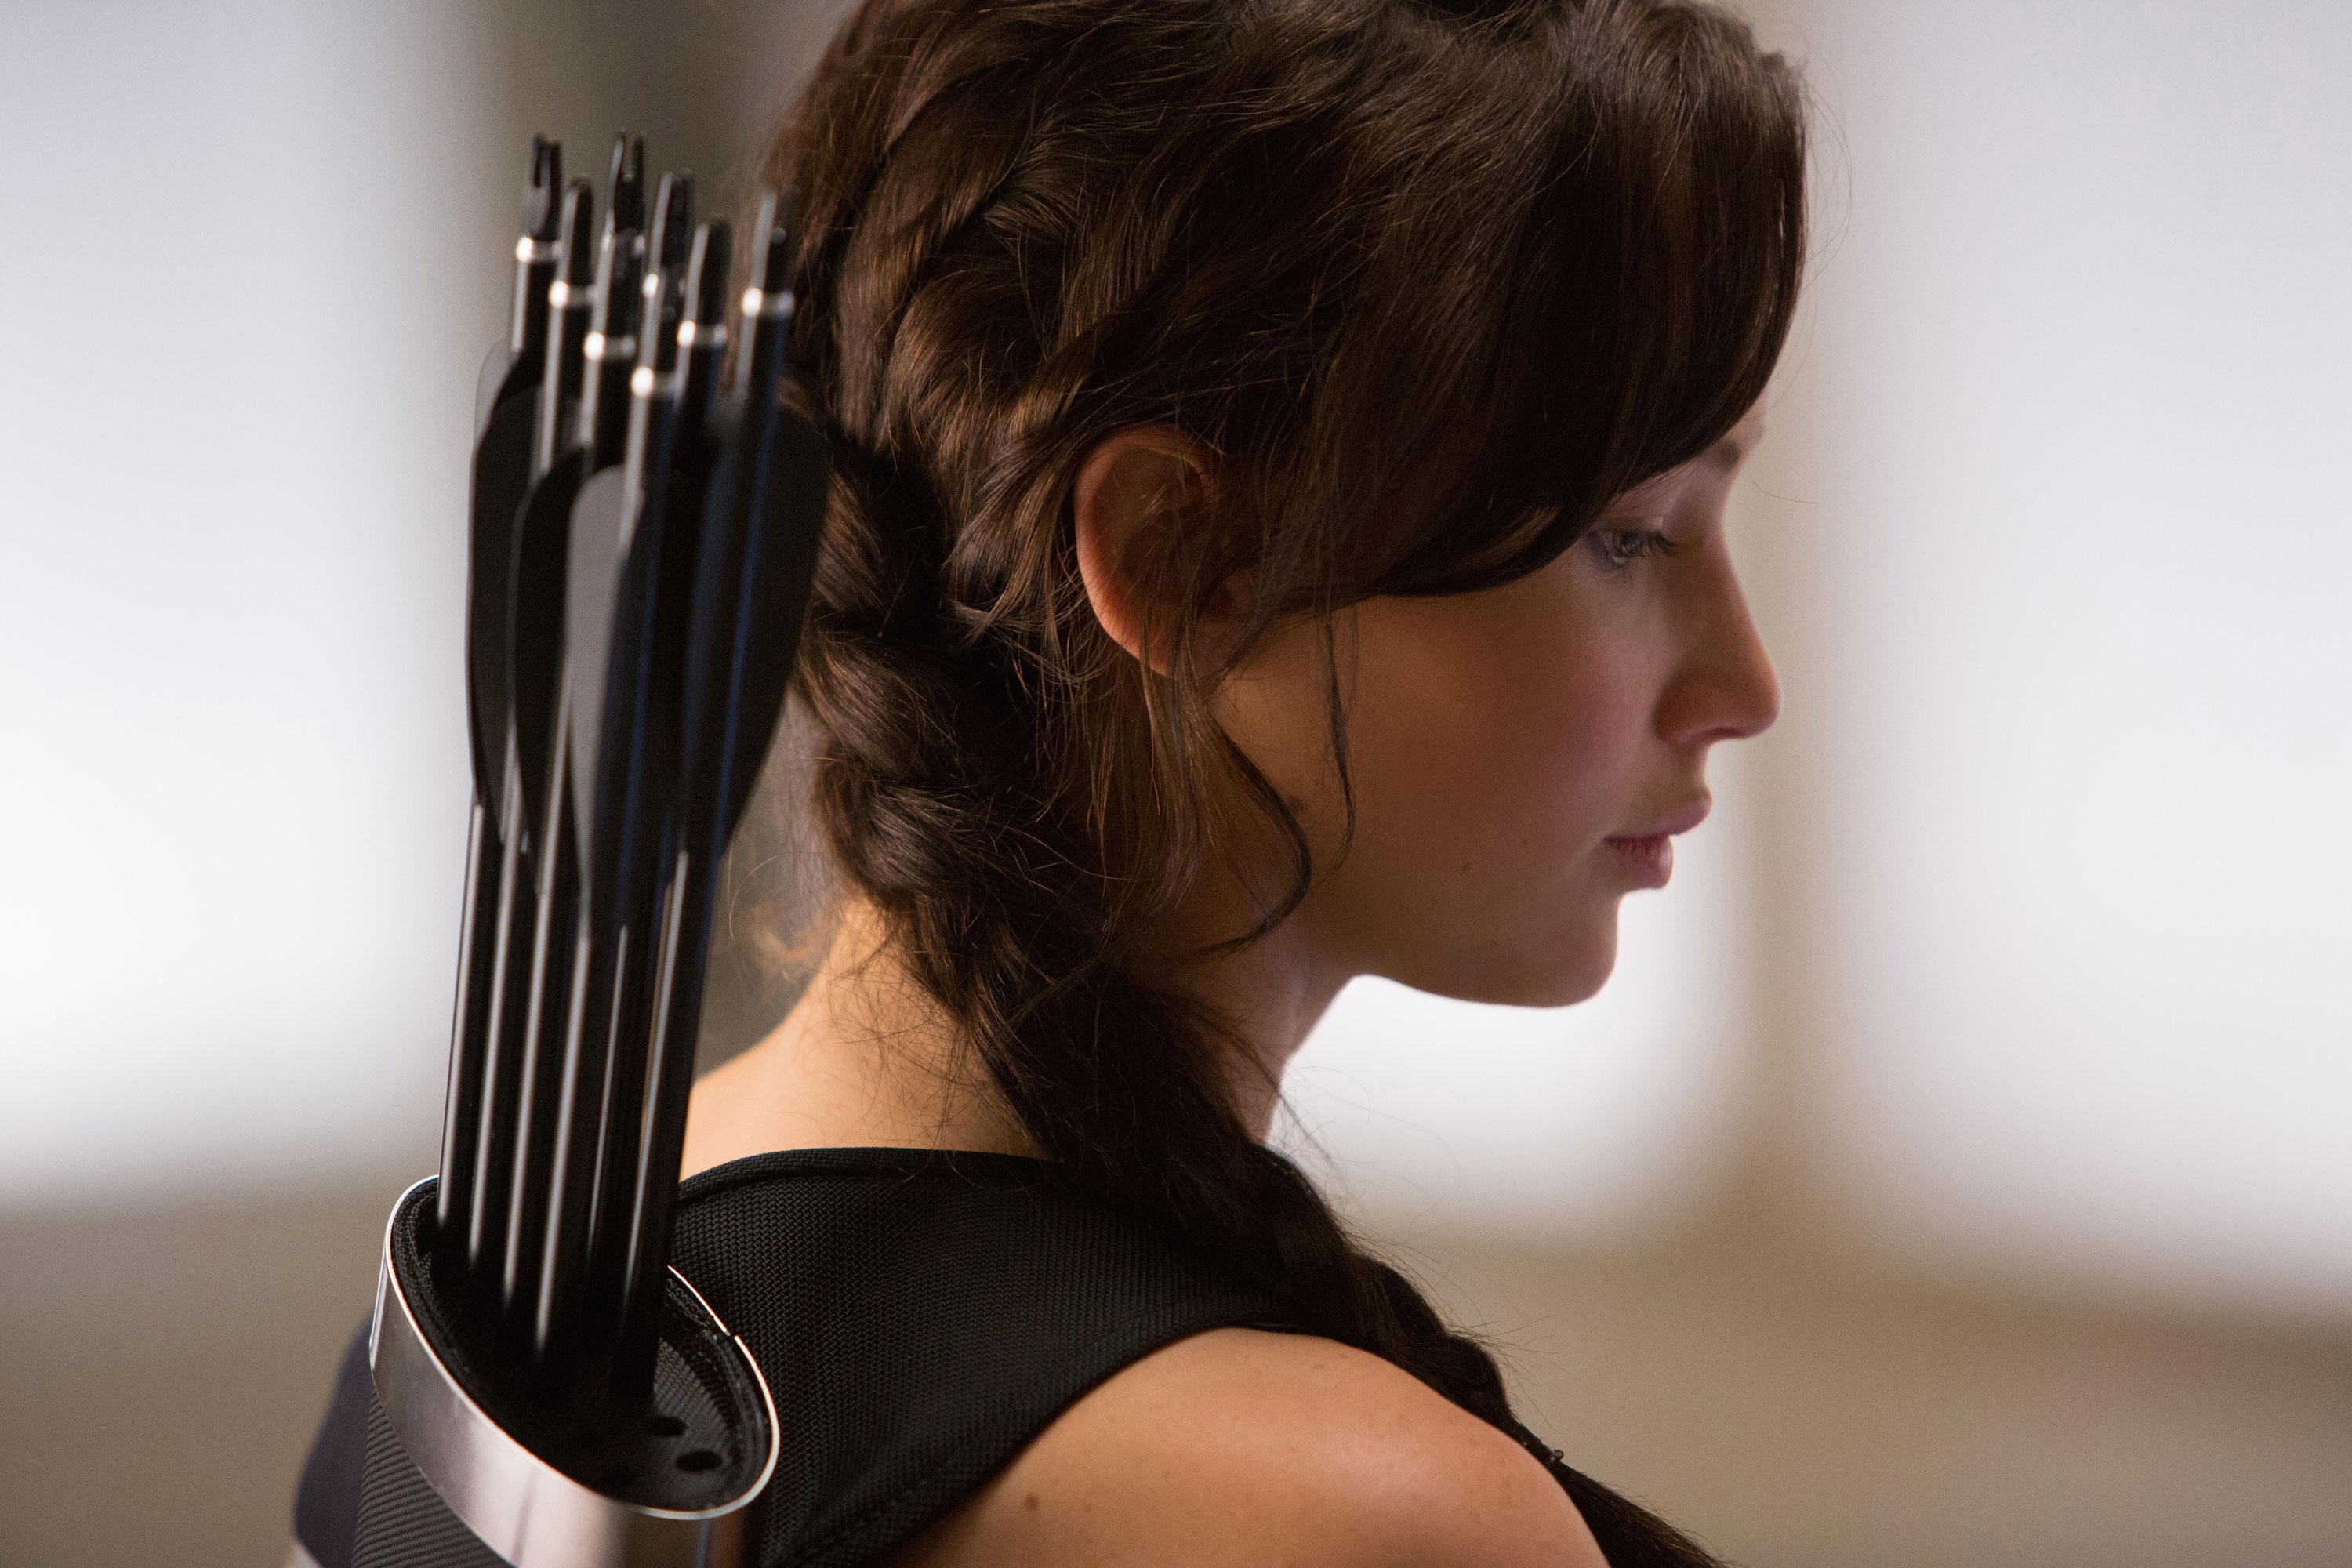 New Photos for The Hunger Games